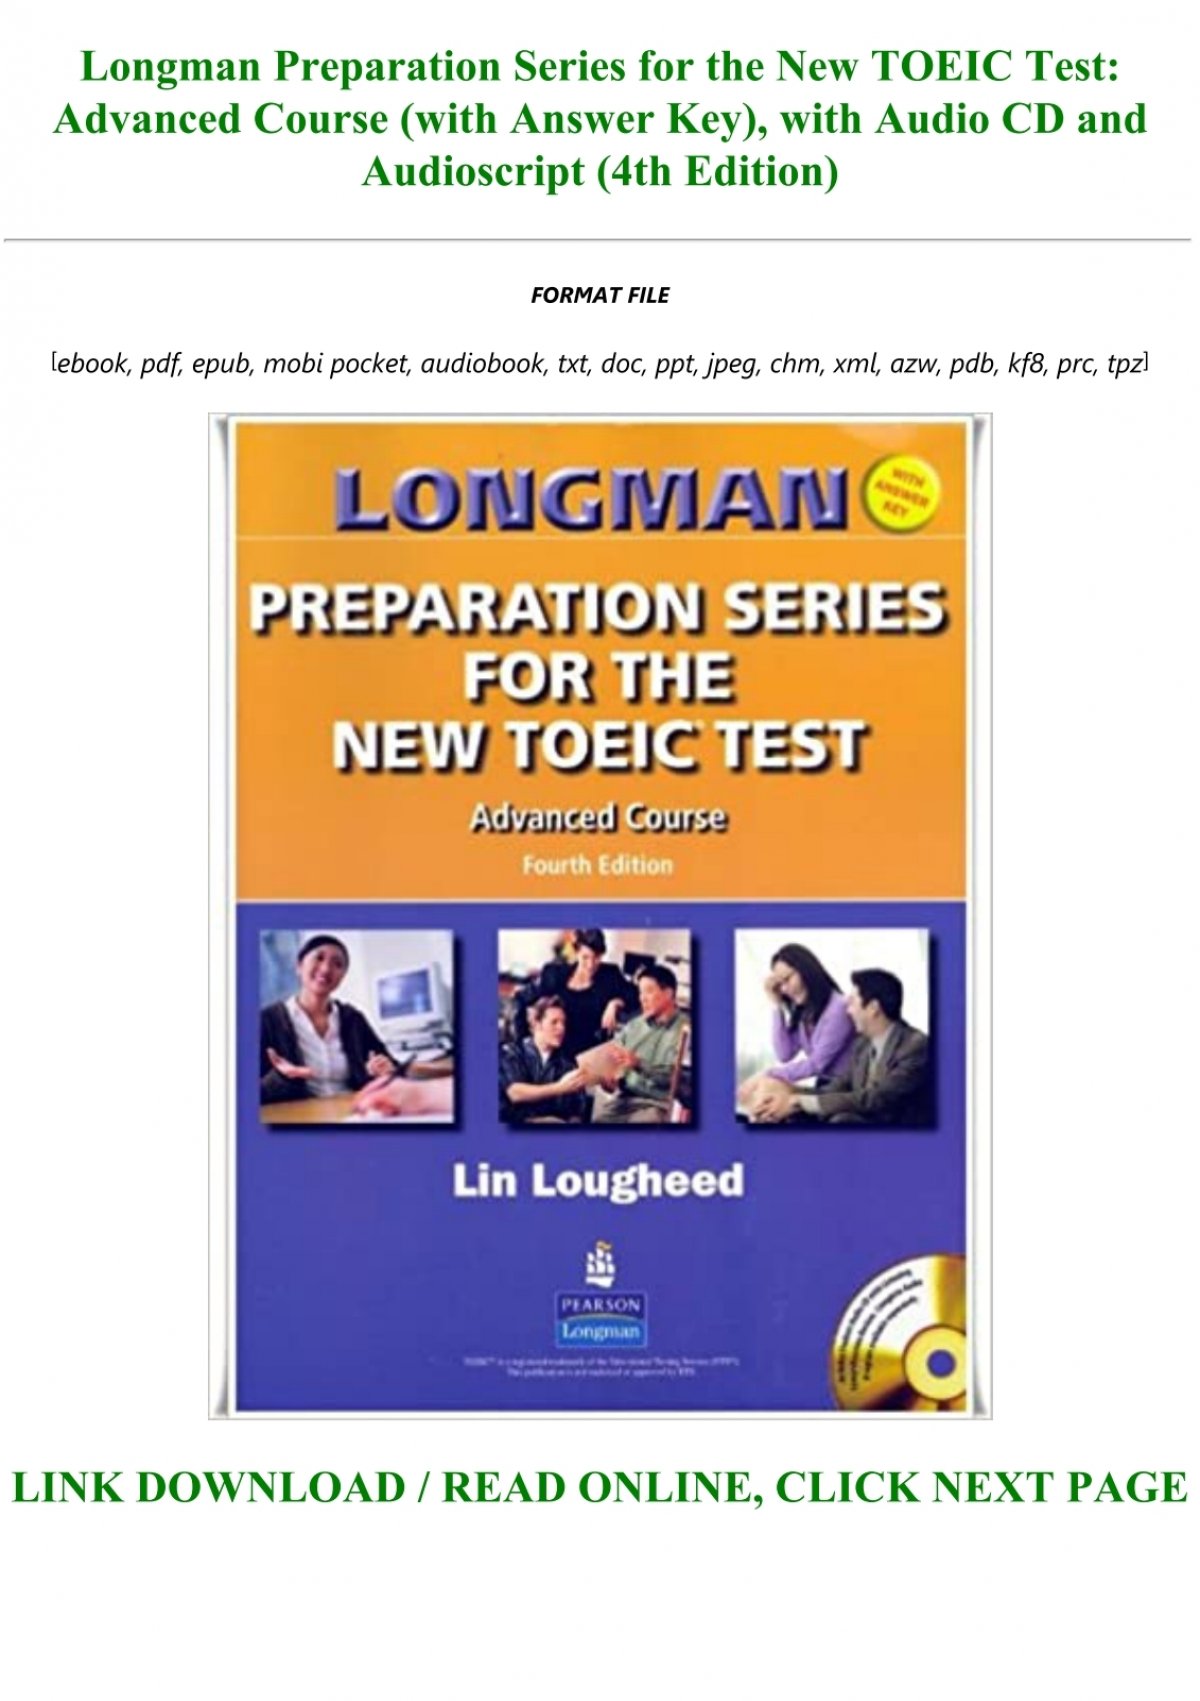 Download Longman Preparation Series For The New Toeic Test Advanced Course With Answer Key With Audio Cd And Audioscript 4th Edition Full Audiobook